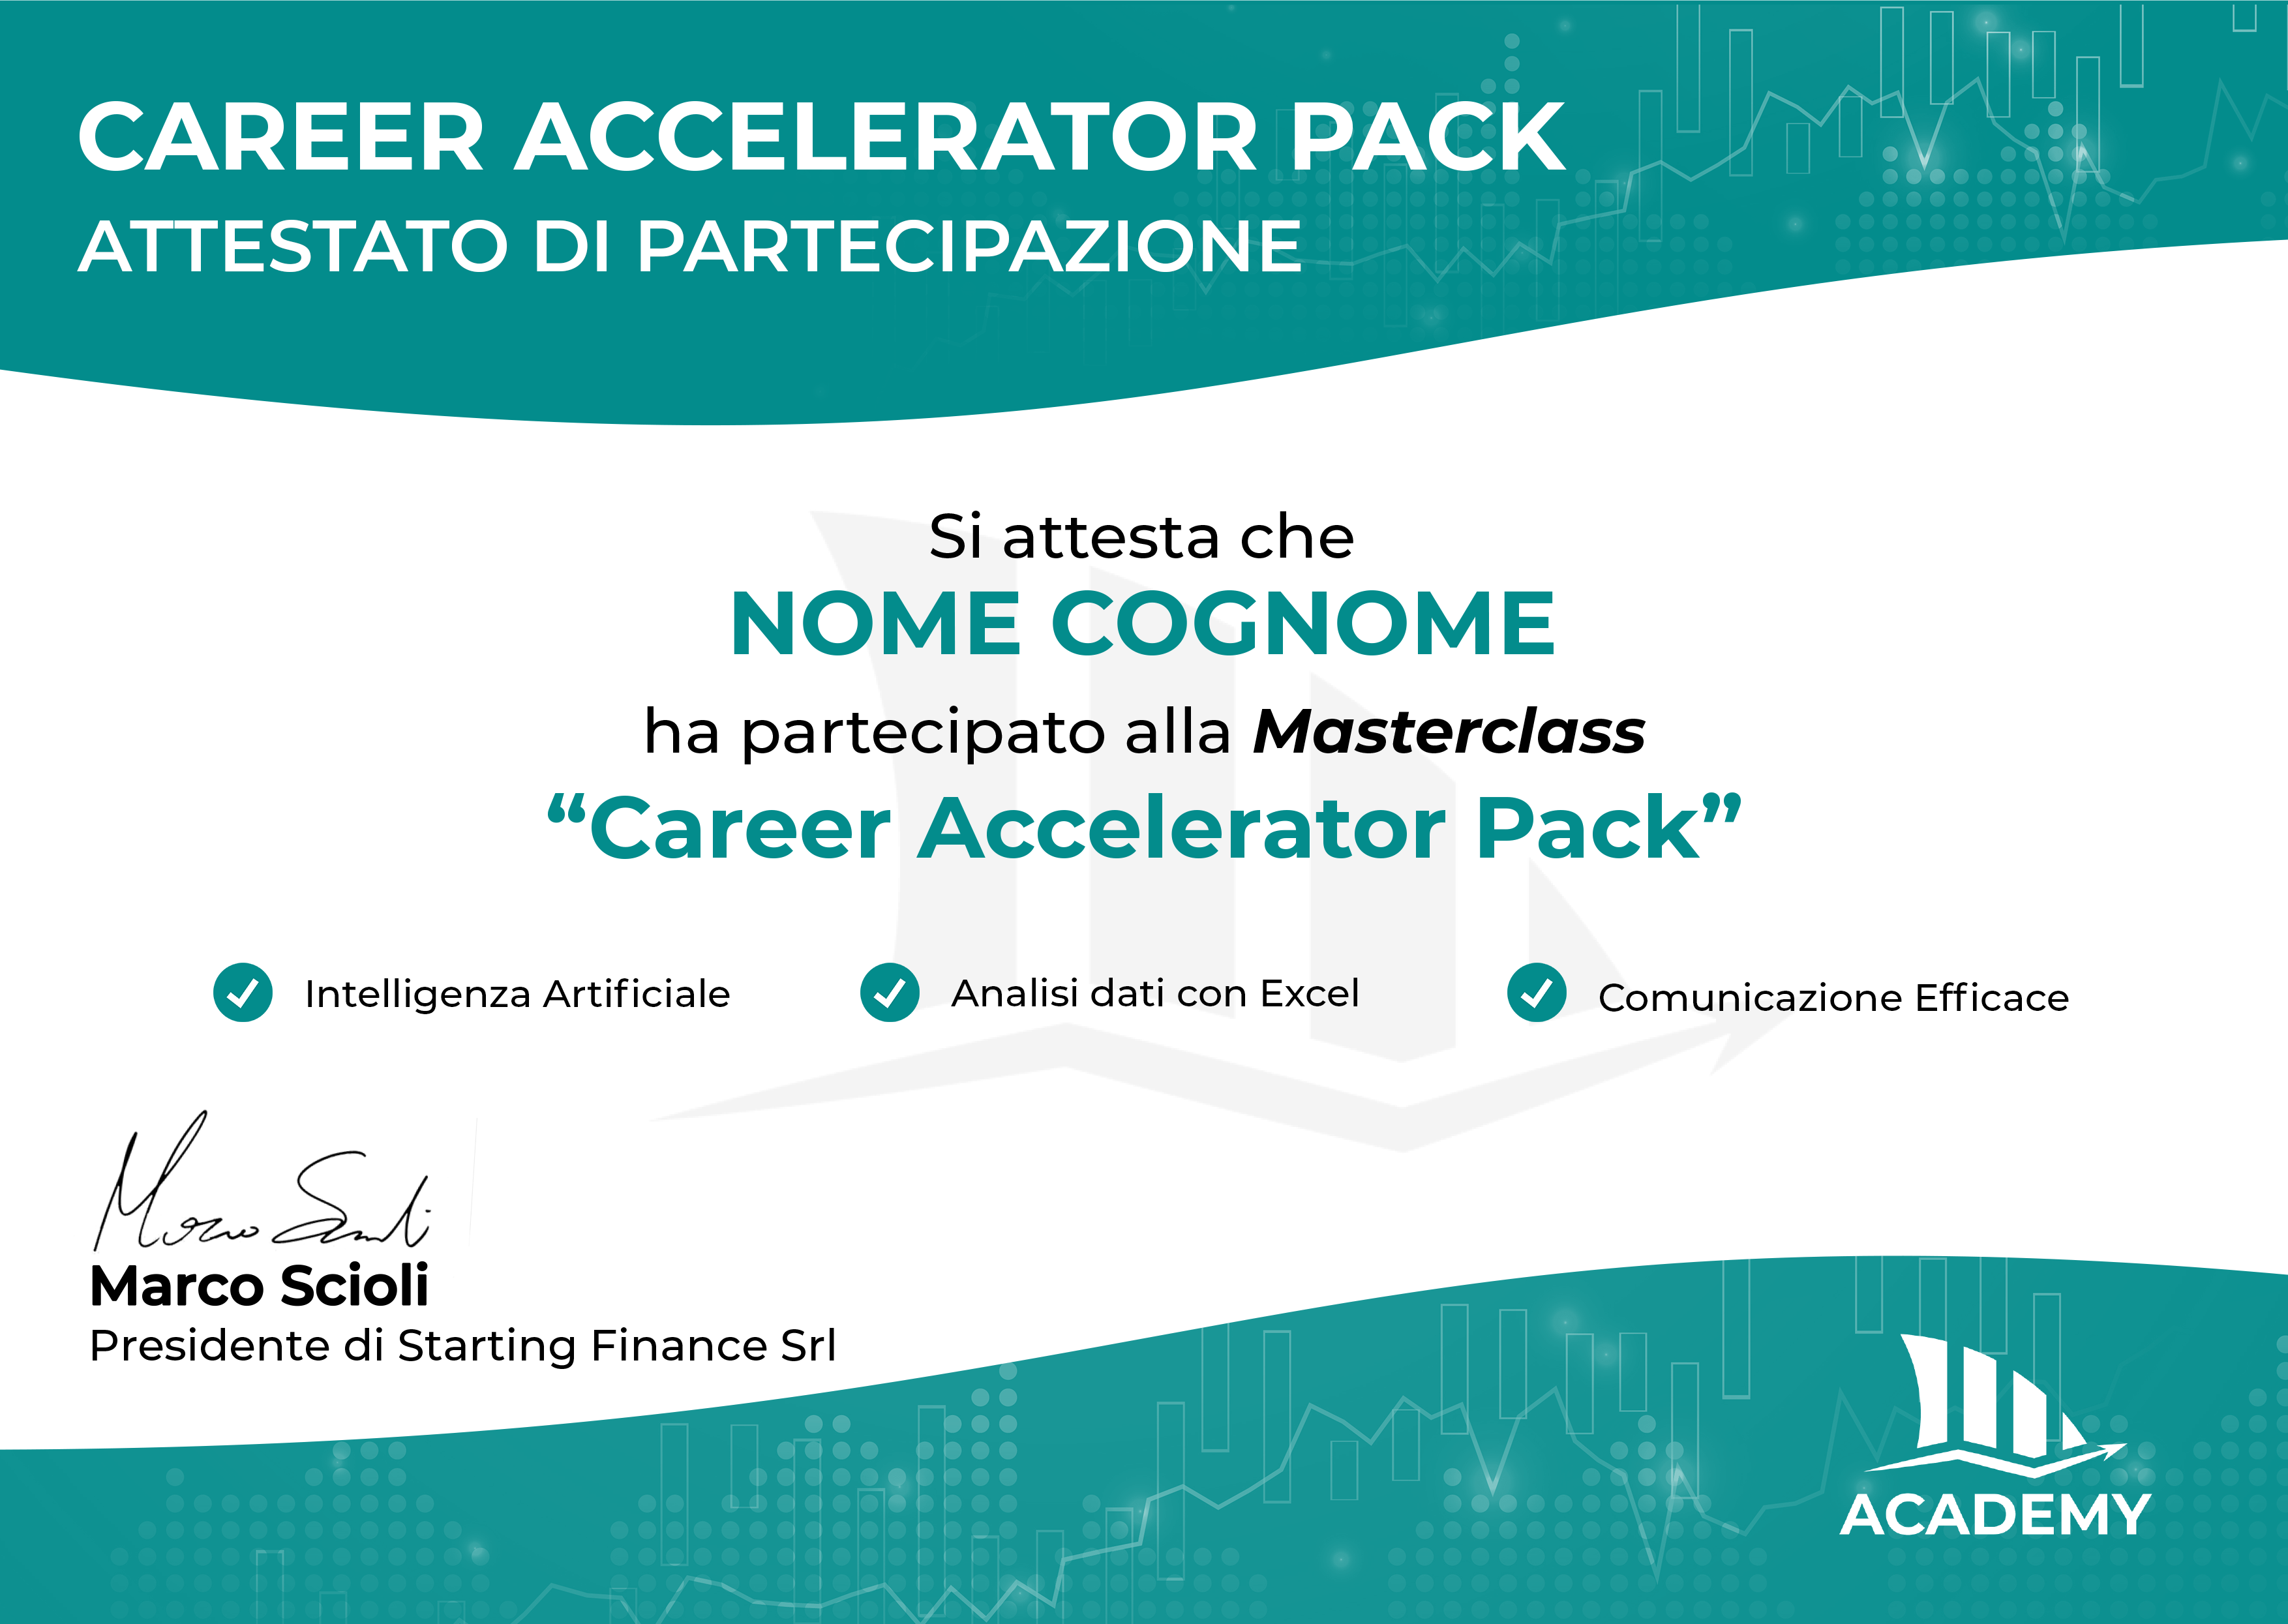 attestato career accelerator pack.png__PID:7cd09130-2aa5-442a-a4b0-39729e20699c